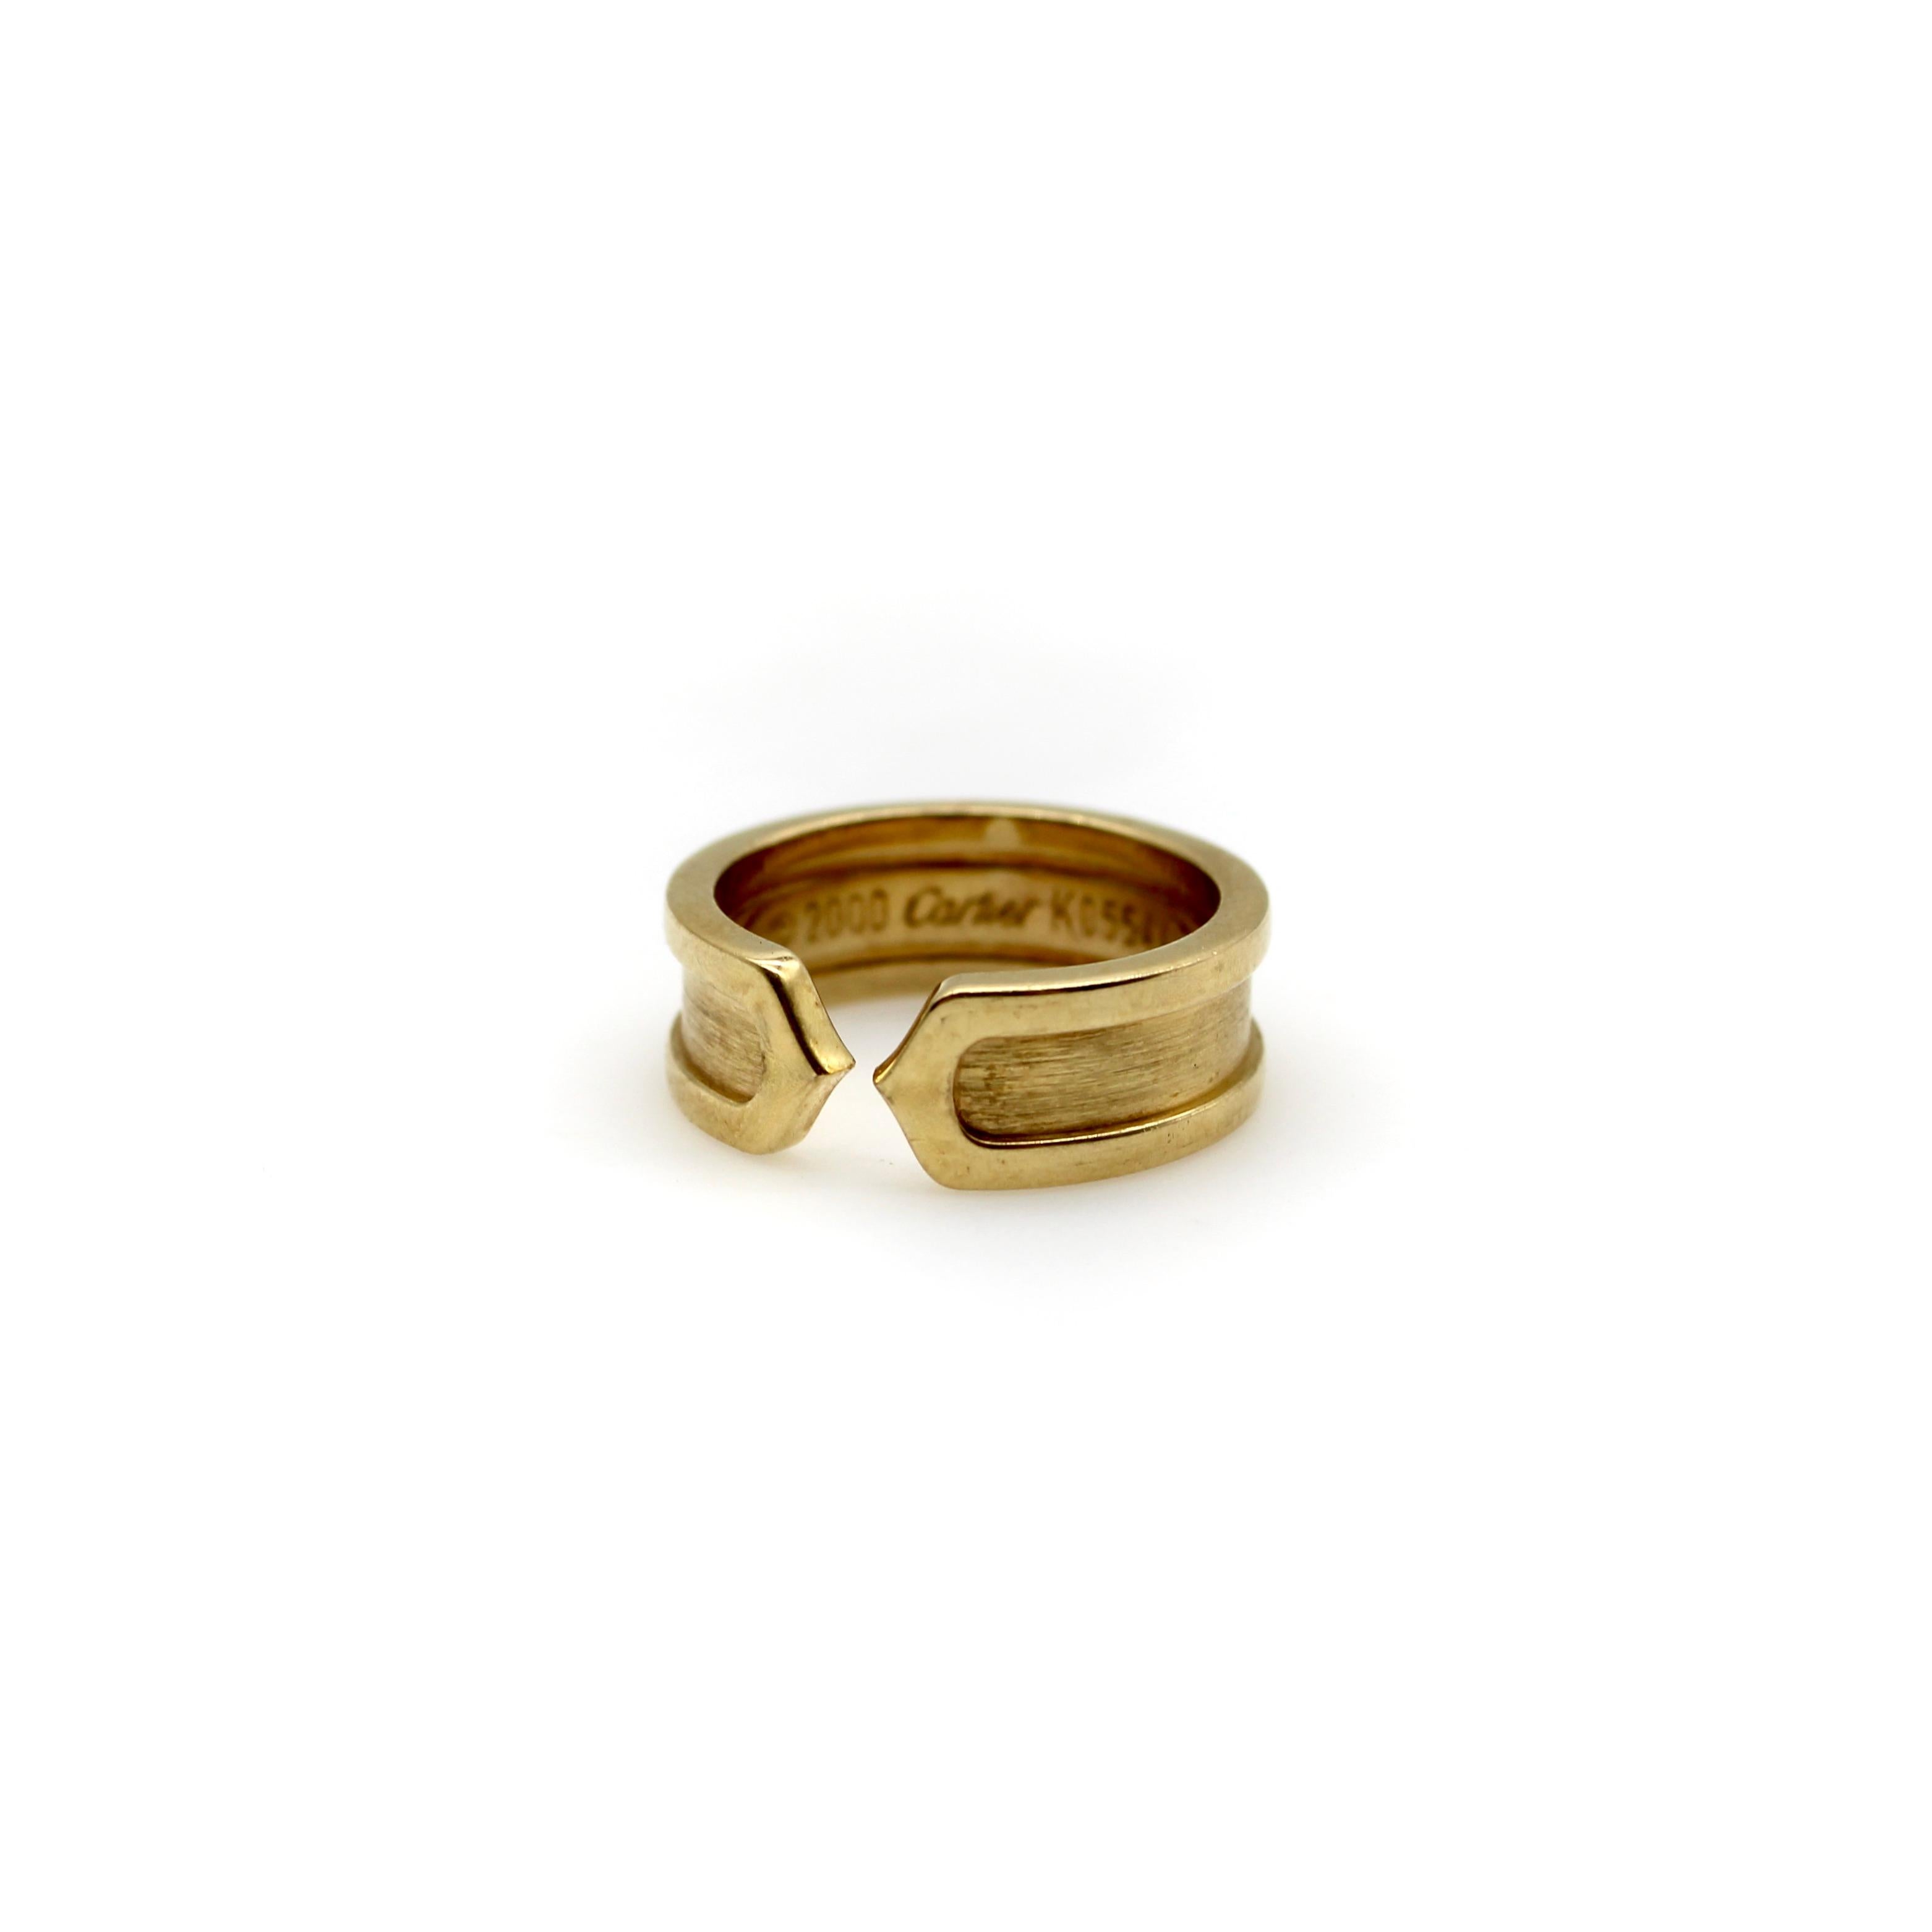 This 18k gold ring is a play on the classic double-c Cartier design. An abstracted c raises up as an exterior border that continues around the band. Two c’s back up against each other, meeting at a sharp point in the middle of the ring for a clean,